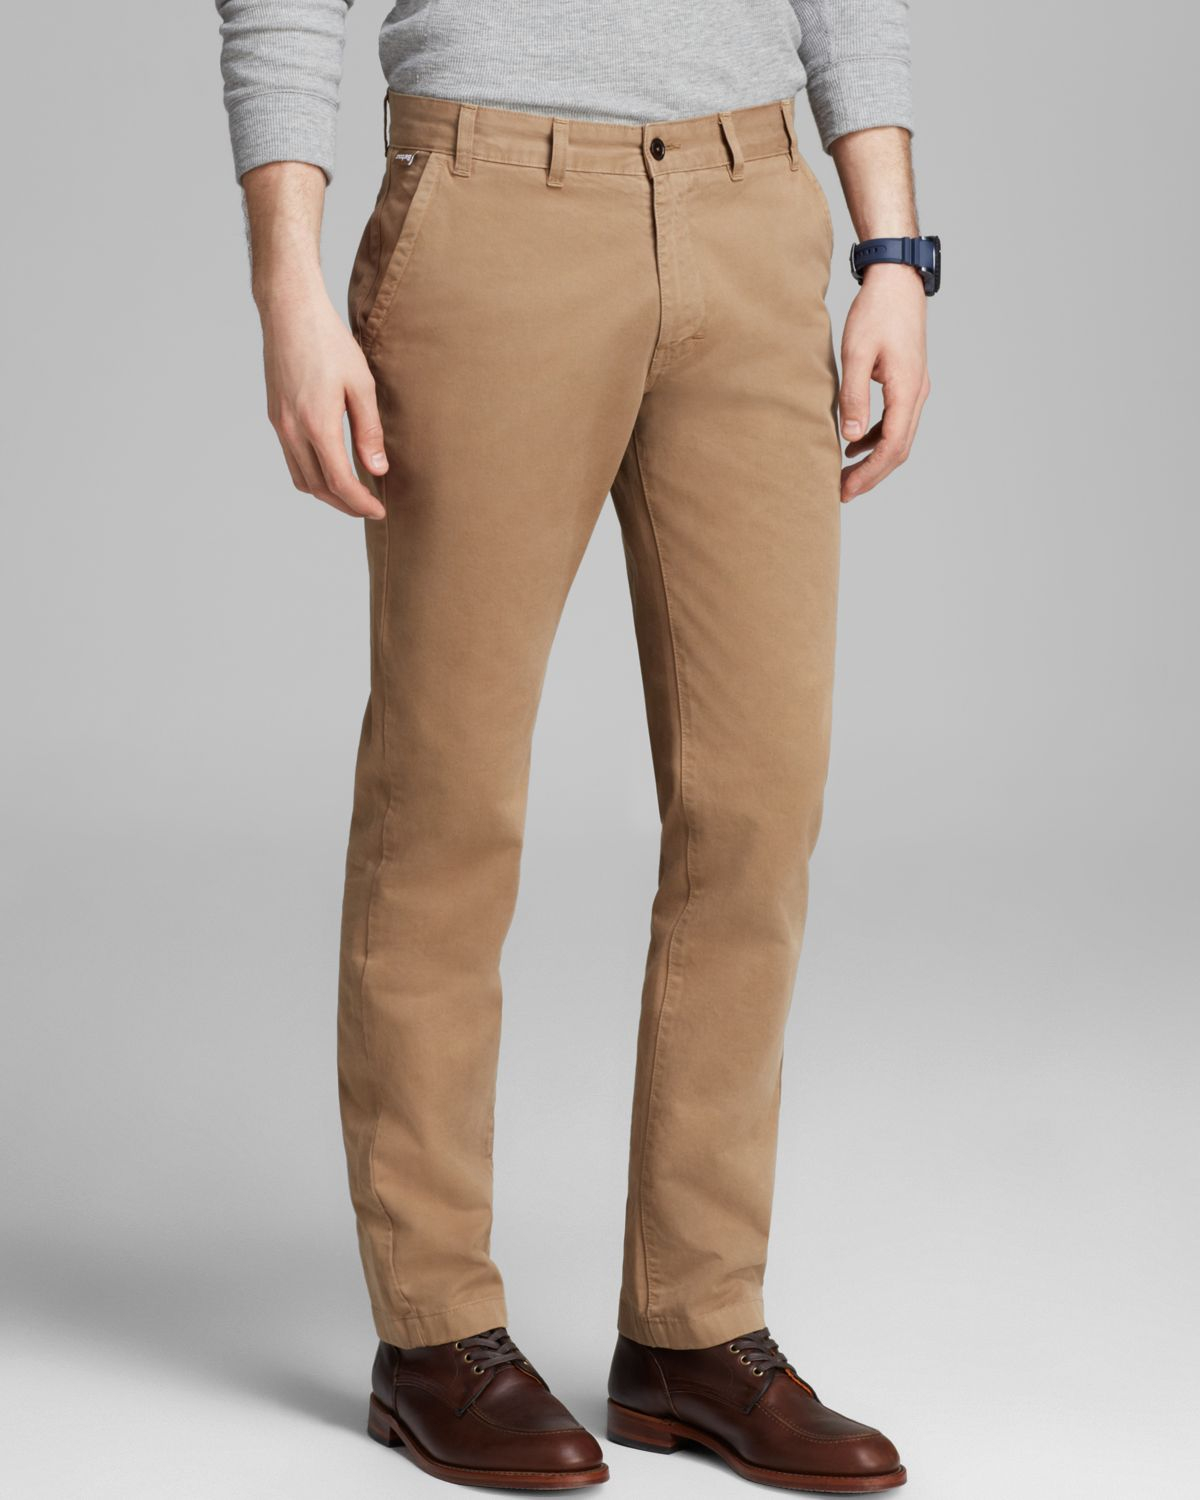 Lyst - Barbour Pantone Collection Chino Pants in Natural for Men